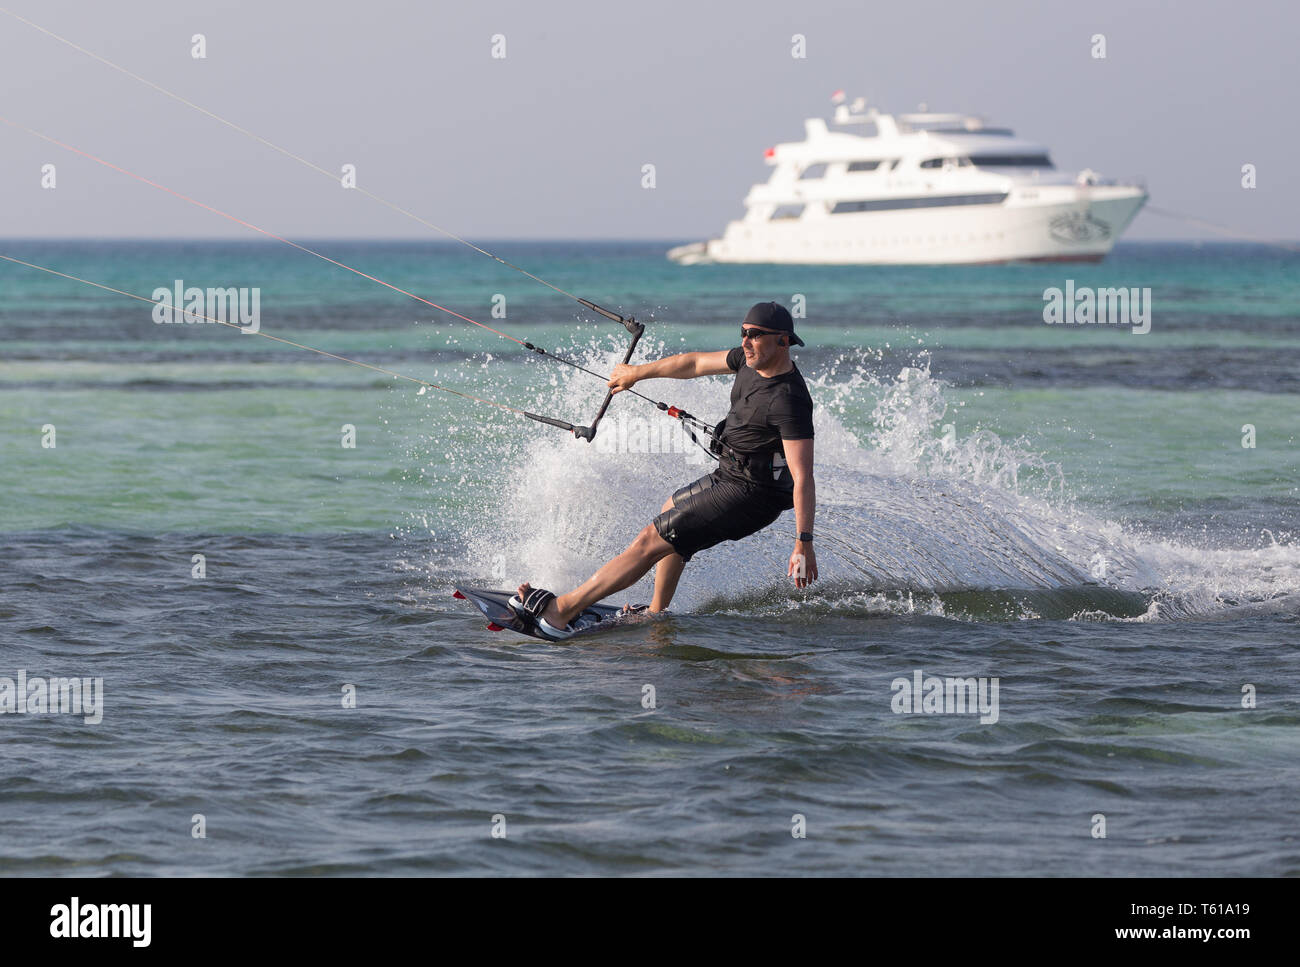 A kiteboarder wearing all black kicks up a huge spray in front of a large motor yacht. Stock Photo